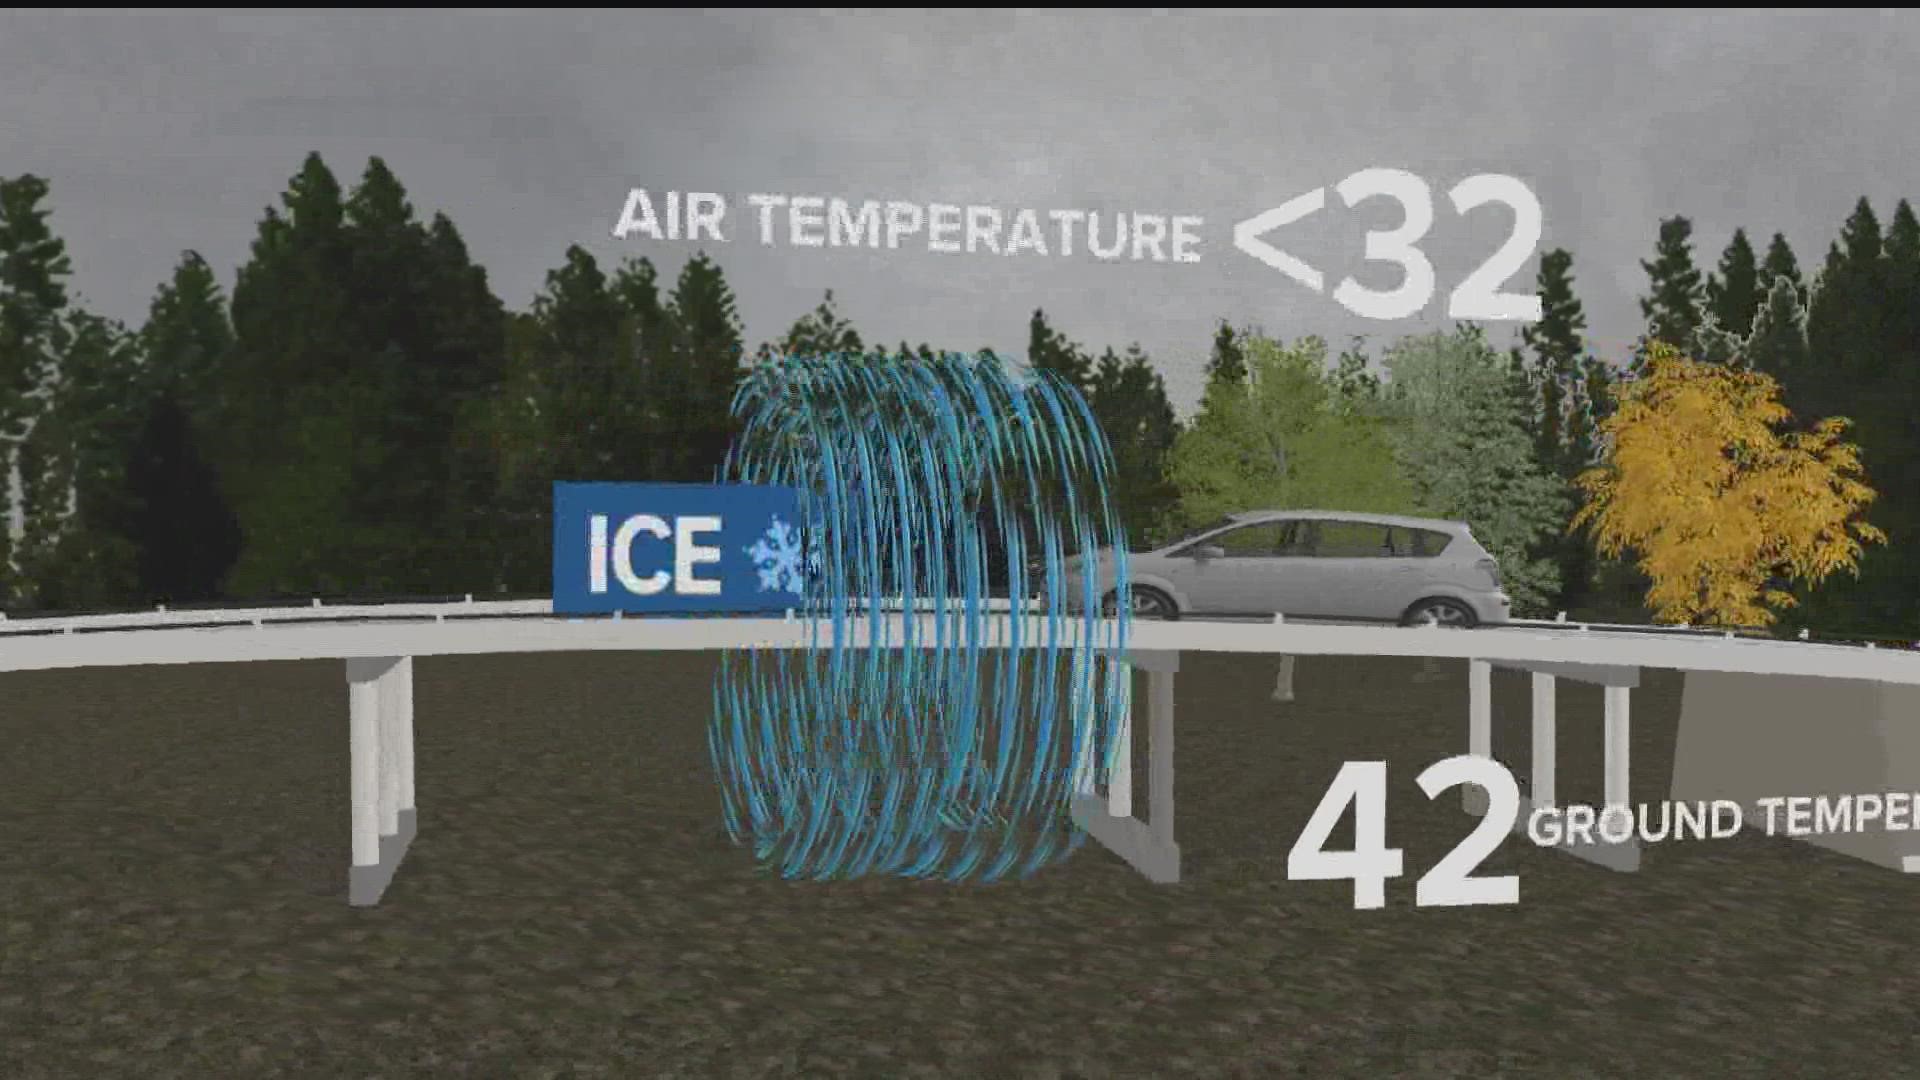 The temperature of the ground can help stop ice from forming on the roads.